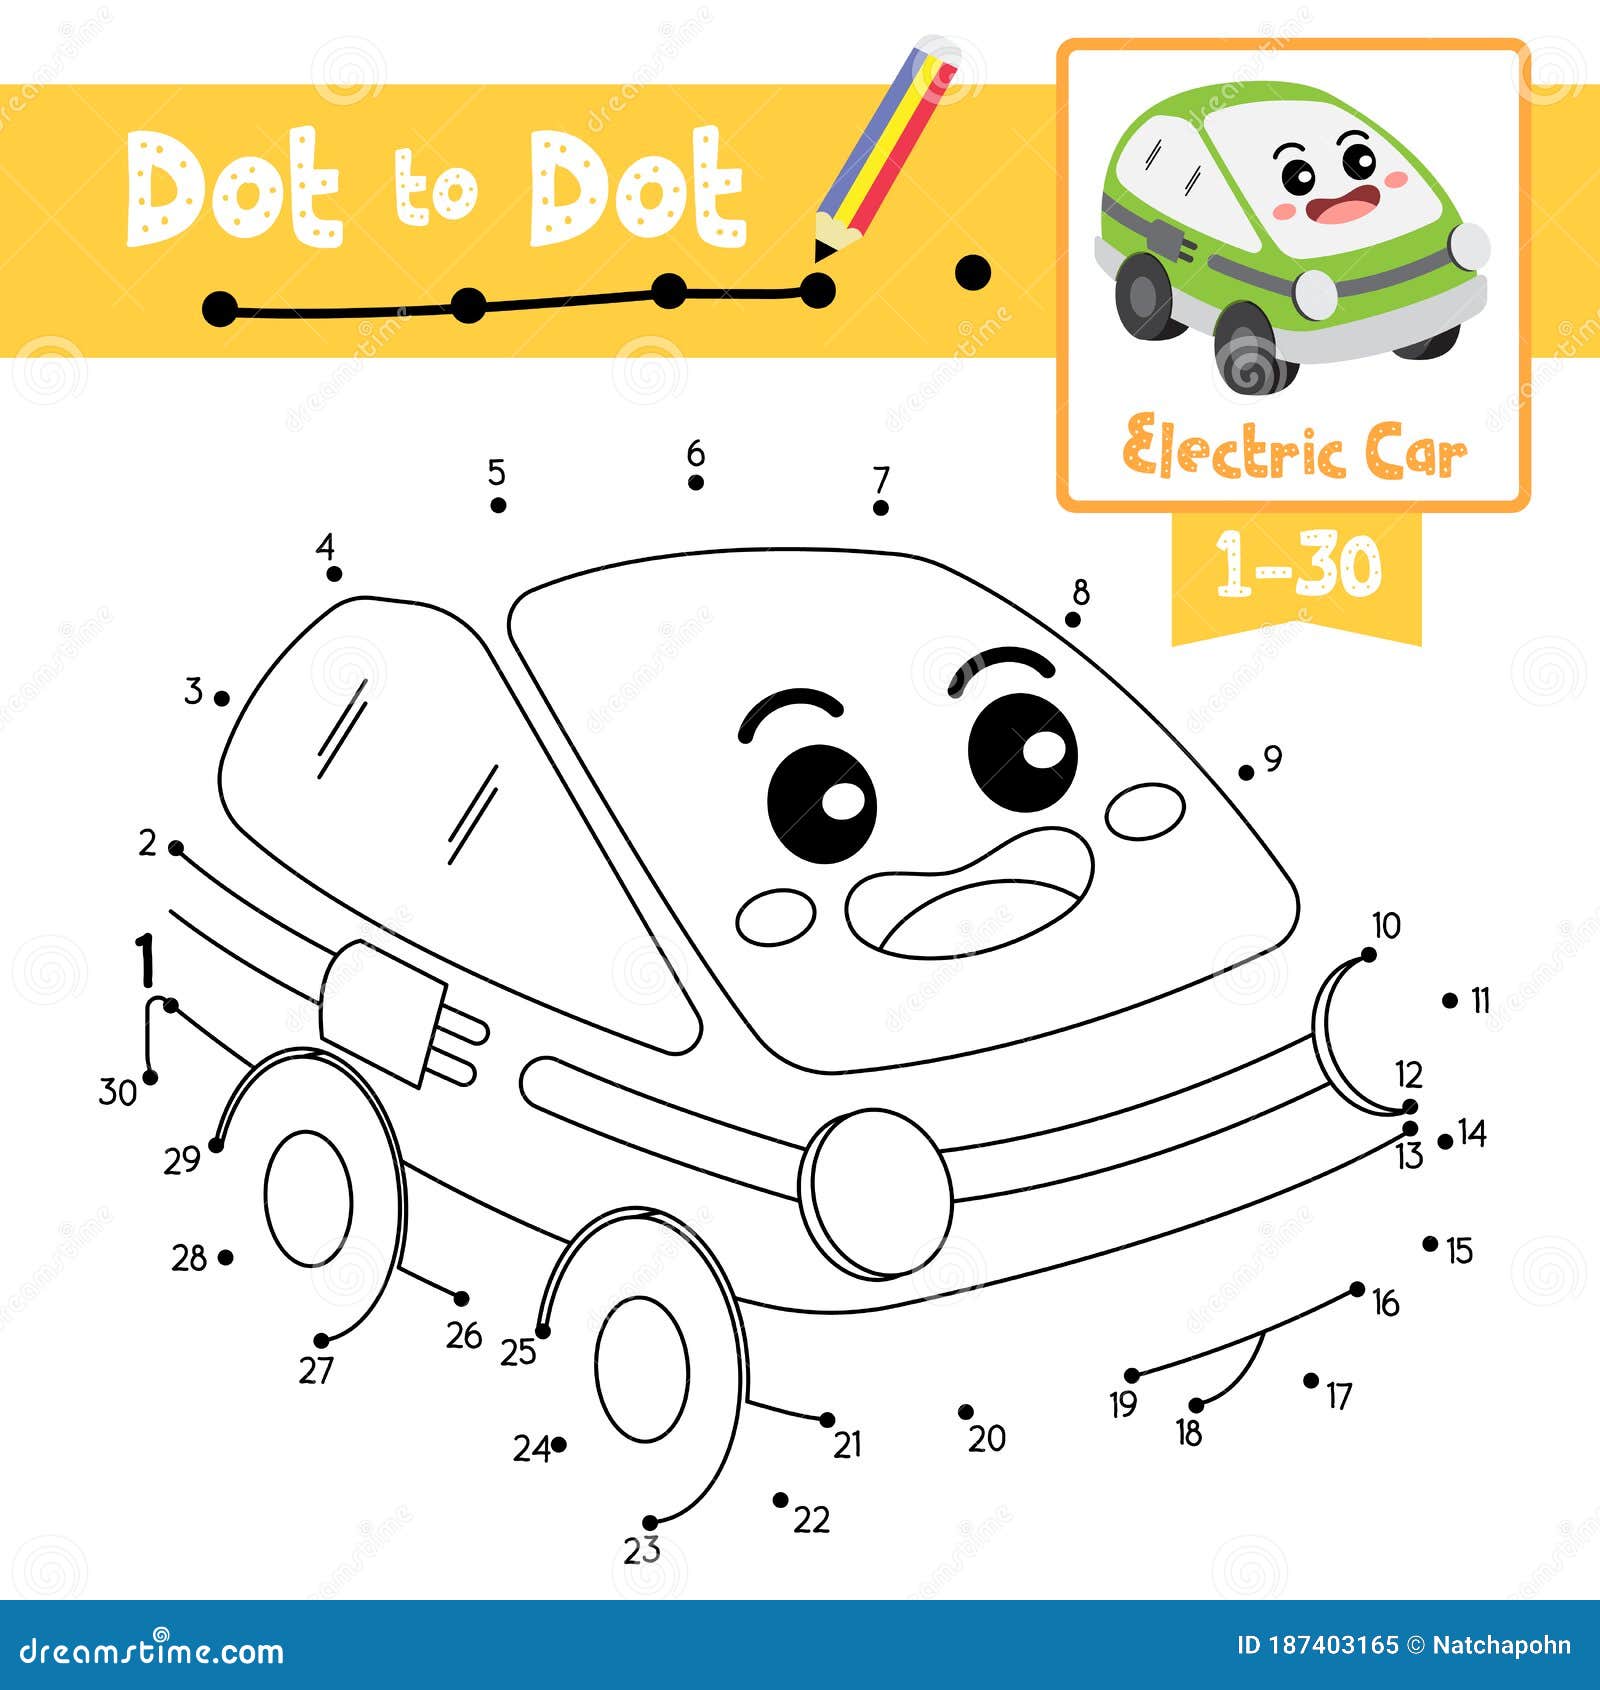 Dot To Dot Educational Game and Coloring Book Electric Car Cartoon  Character Perspective View Vector Illustration Stock Vector - Illustration  of cartoon, dottodot: 187403165